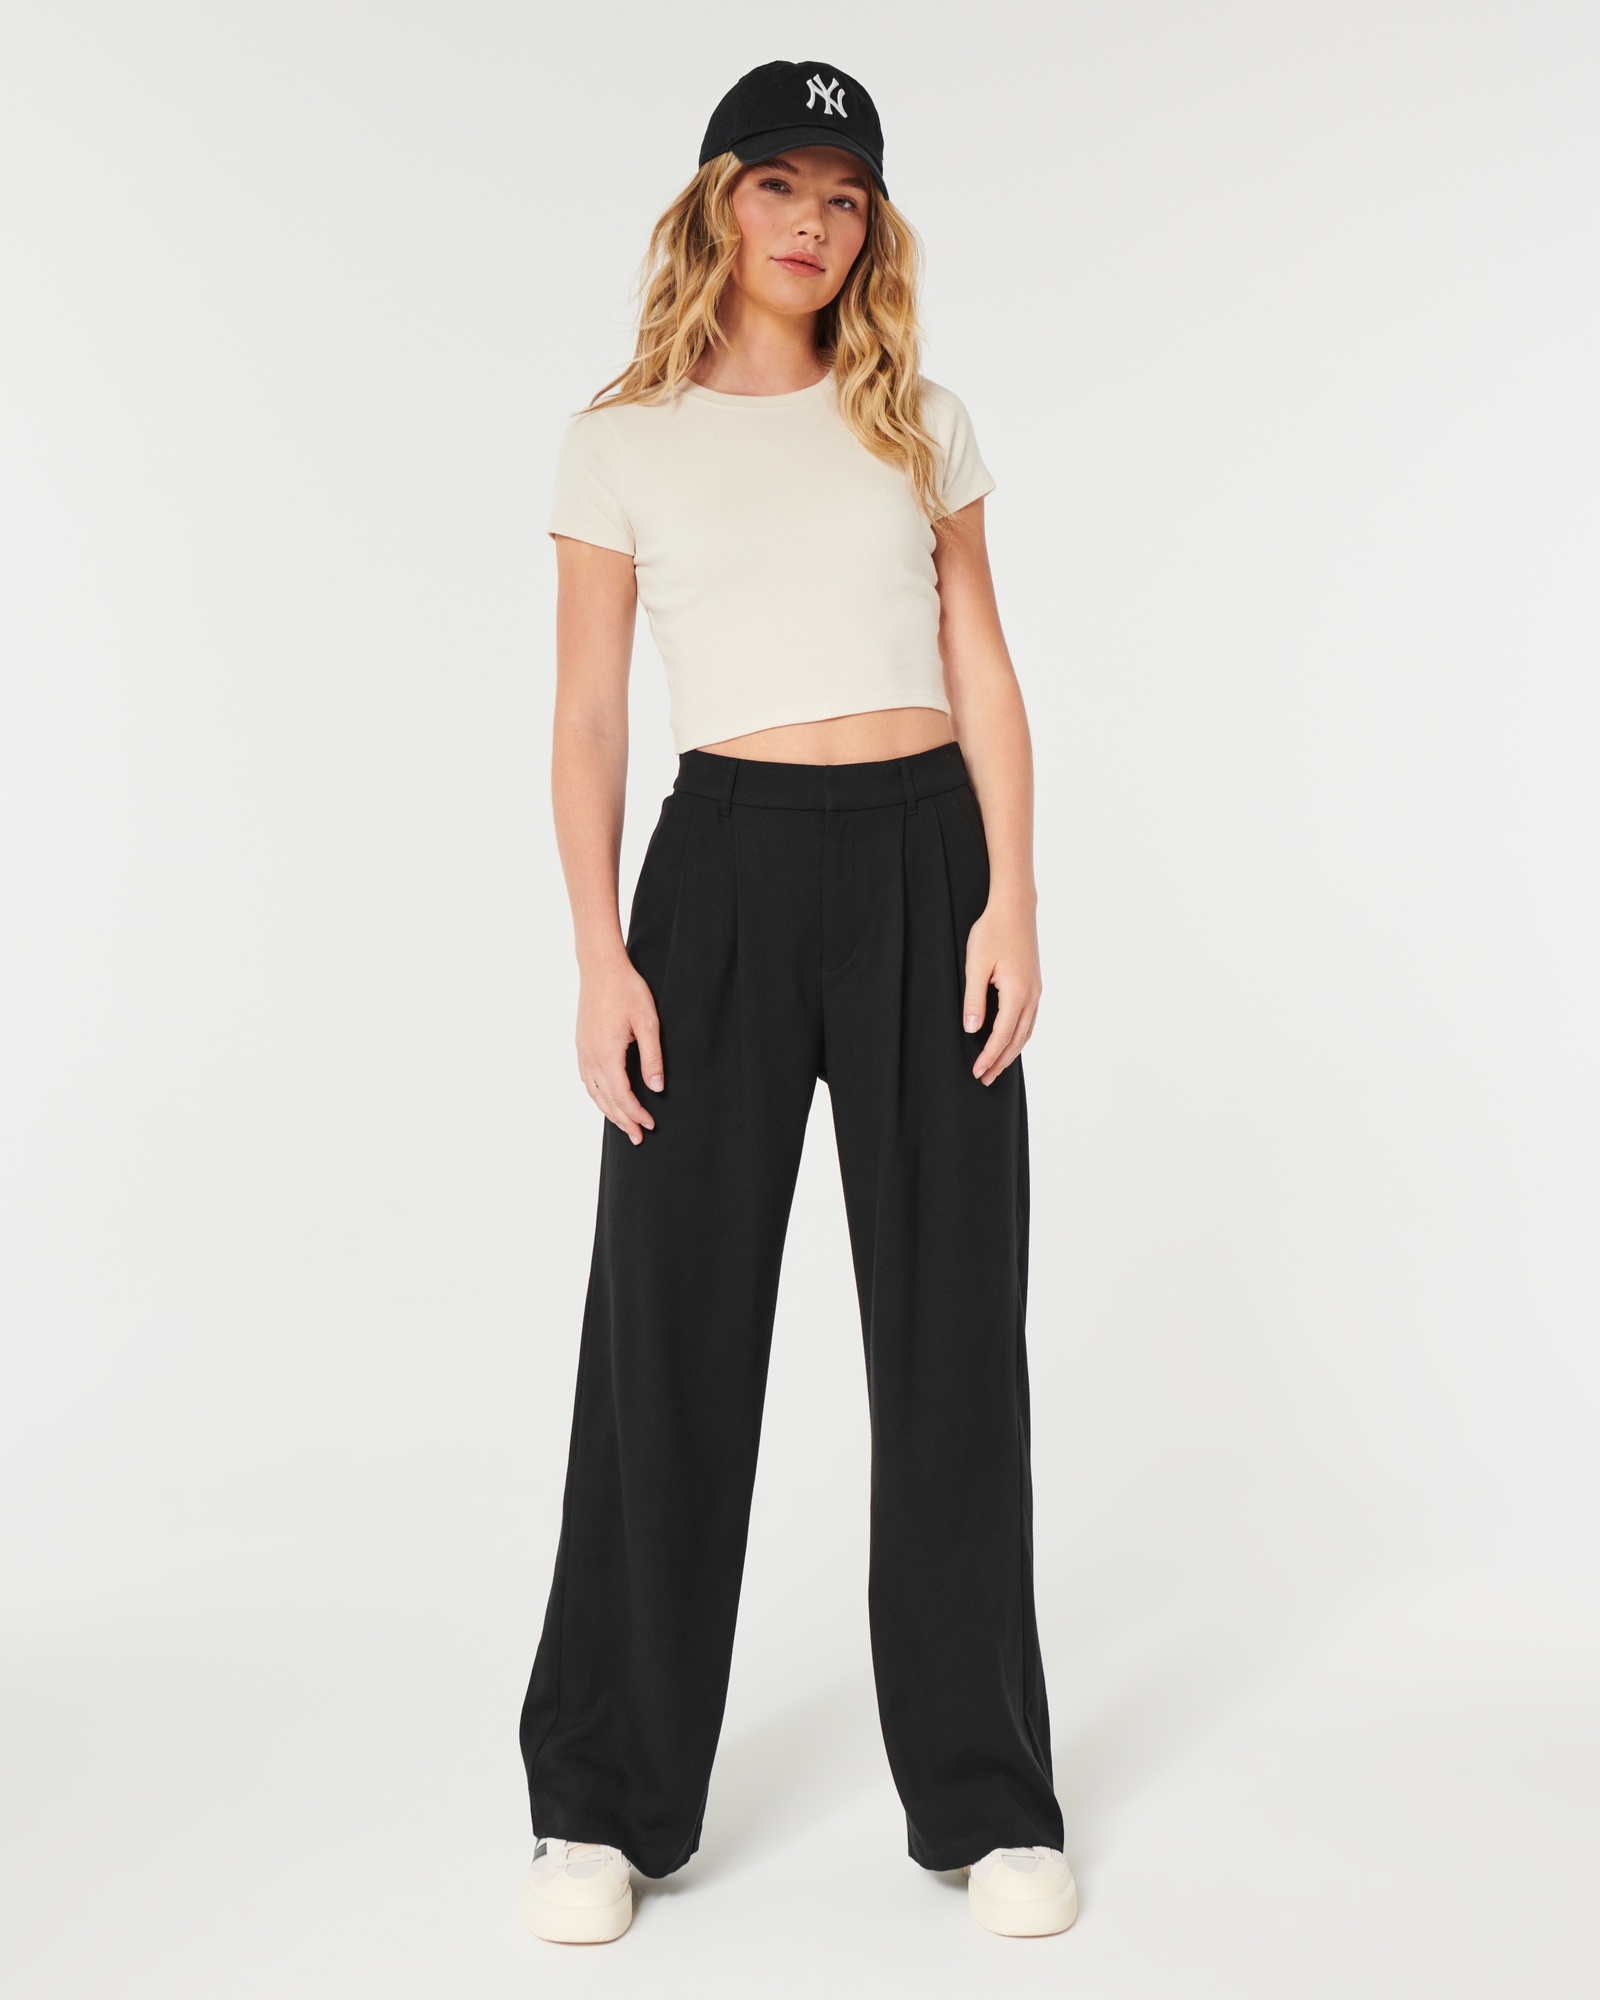 https://img.hollisterco.com/is/image/anf/KIC_356-3042-0360-900_model1.jpg?policy=product-extra-large